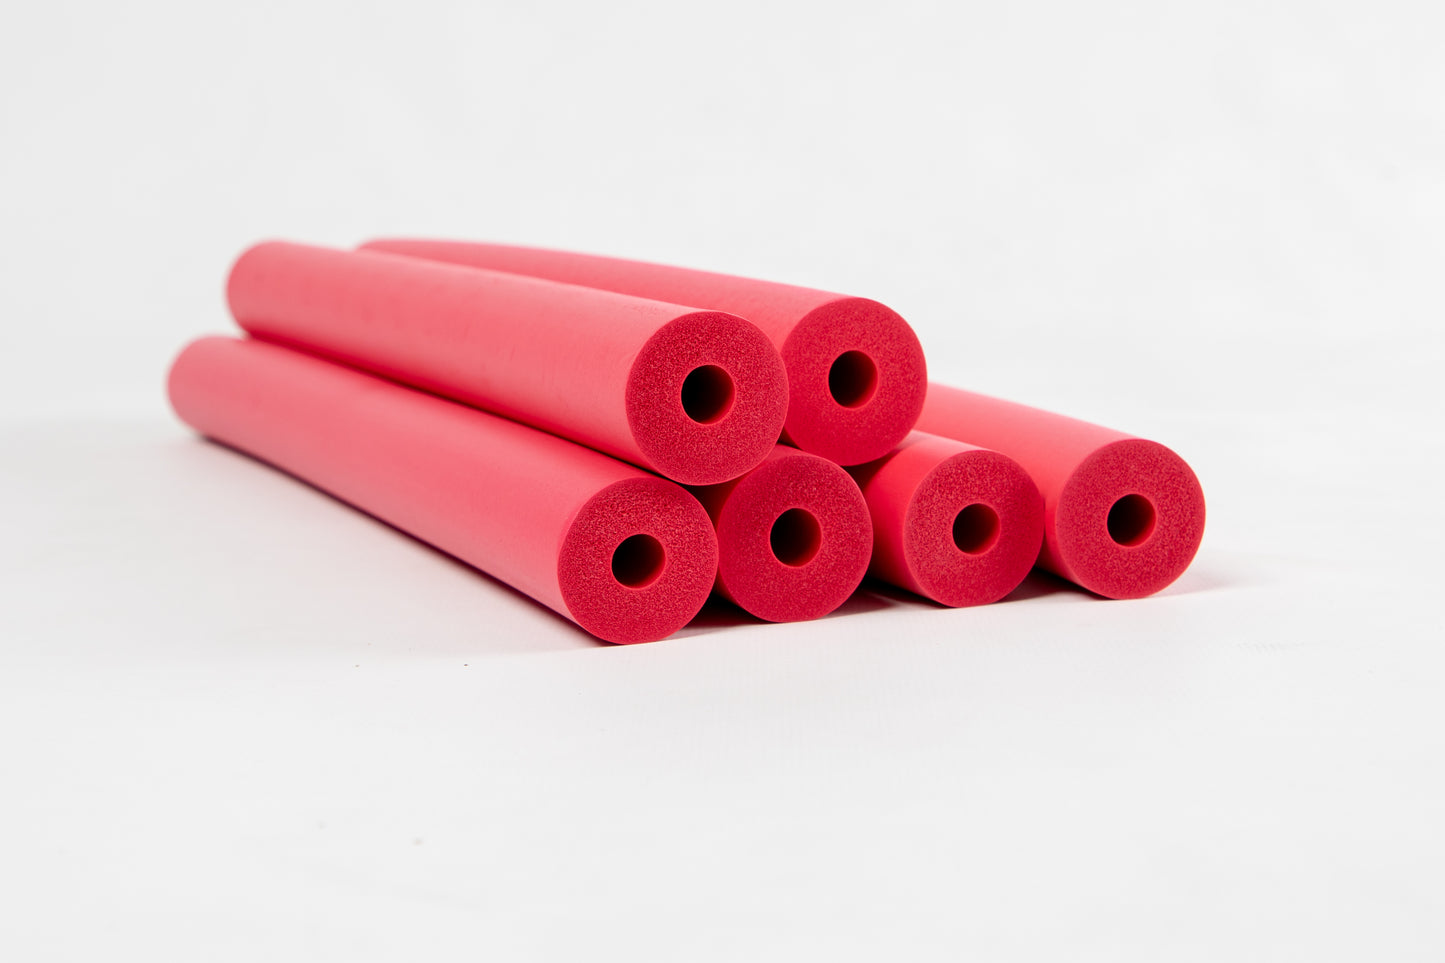 Foam Tubing - Ideal for hand grip build ups